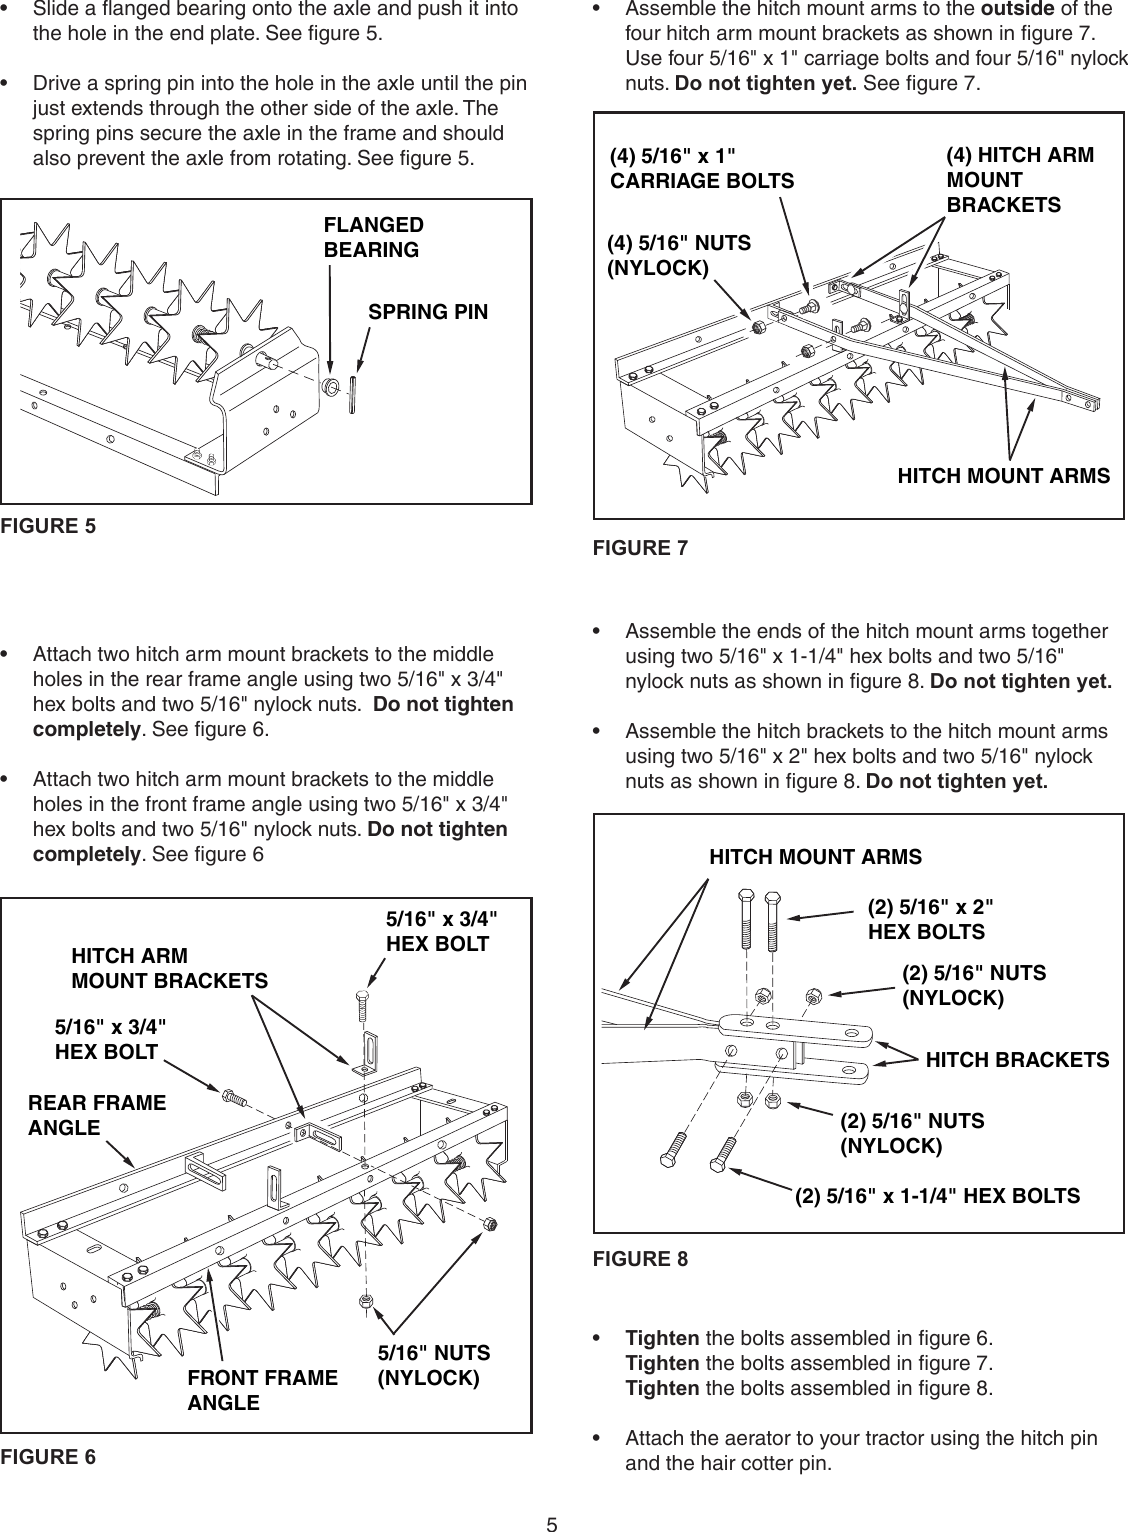 Page 5 of 8 - Craftsman Craftsman-36-In-Spike-Aerator-Owners-Manual-  Craftsman-36-in-spike-aerator-owners-manual